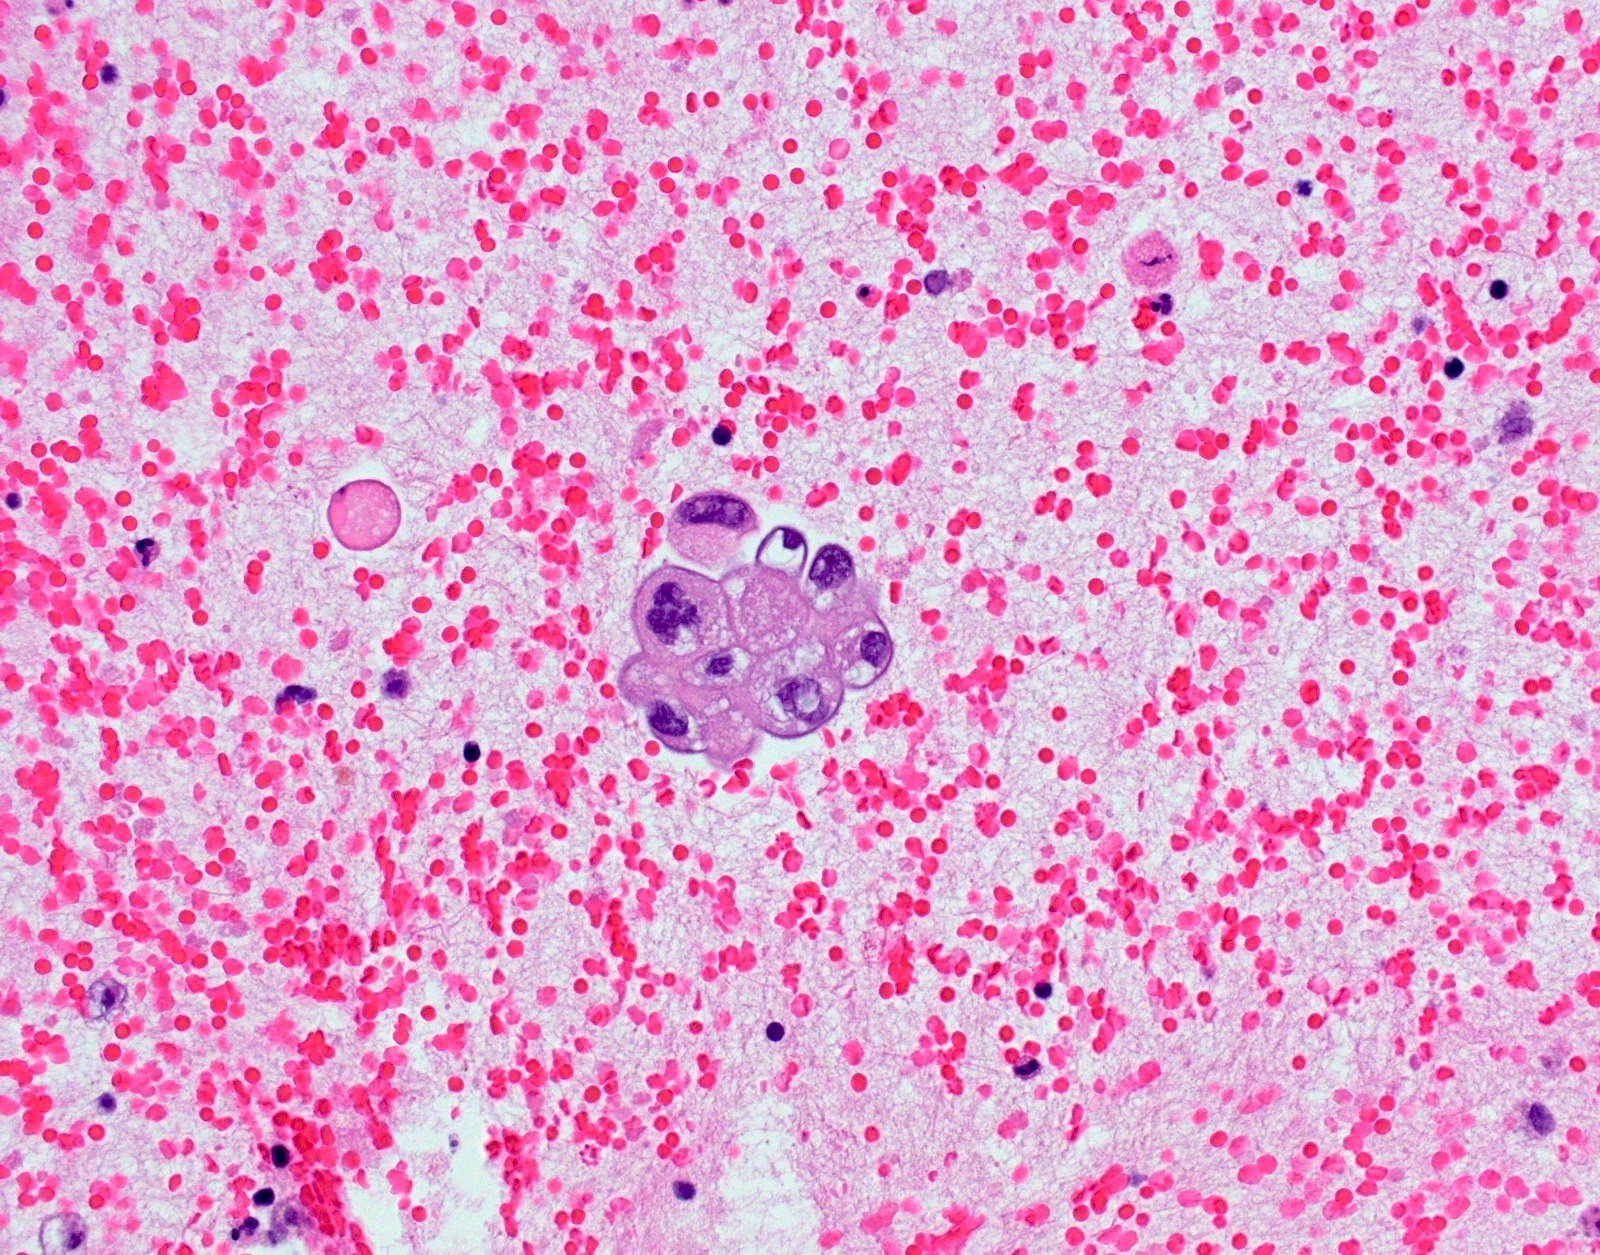 Positive result, scant cytology